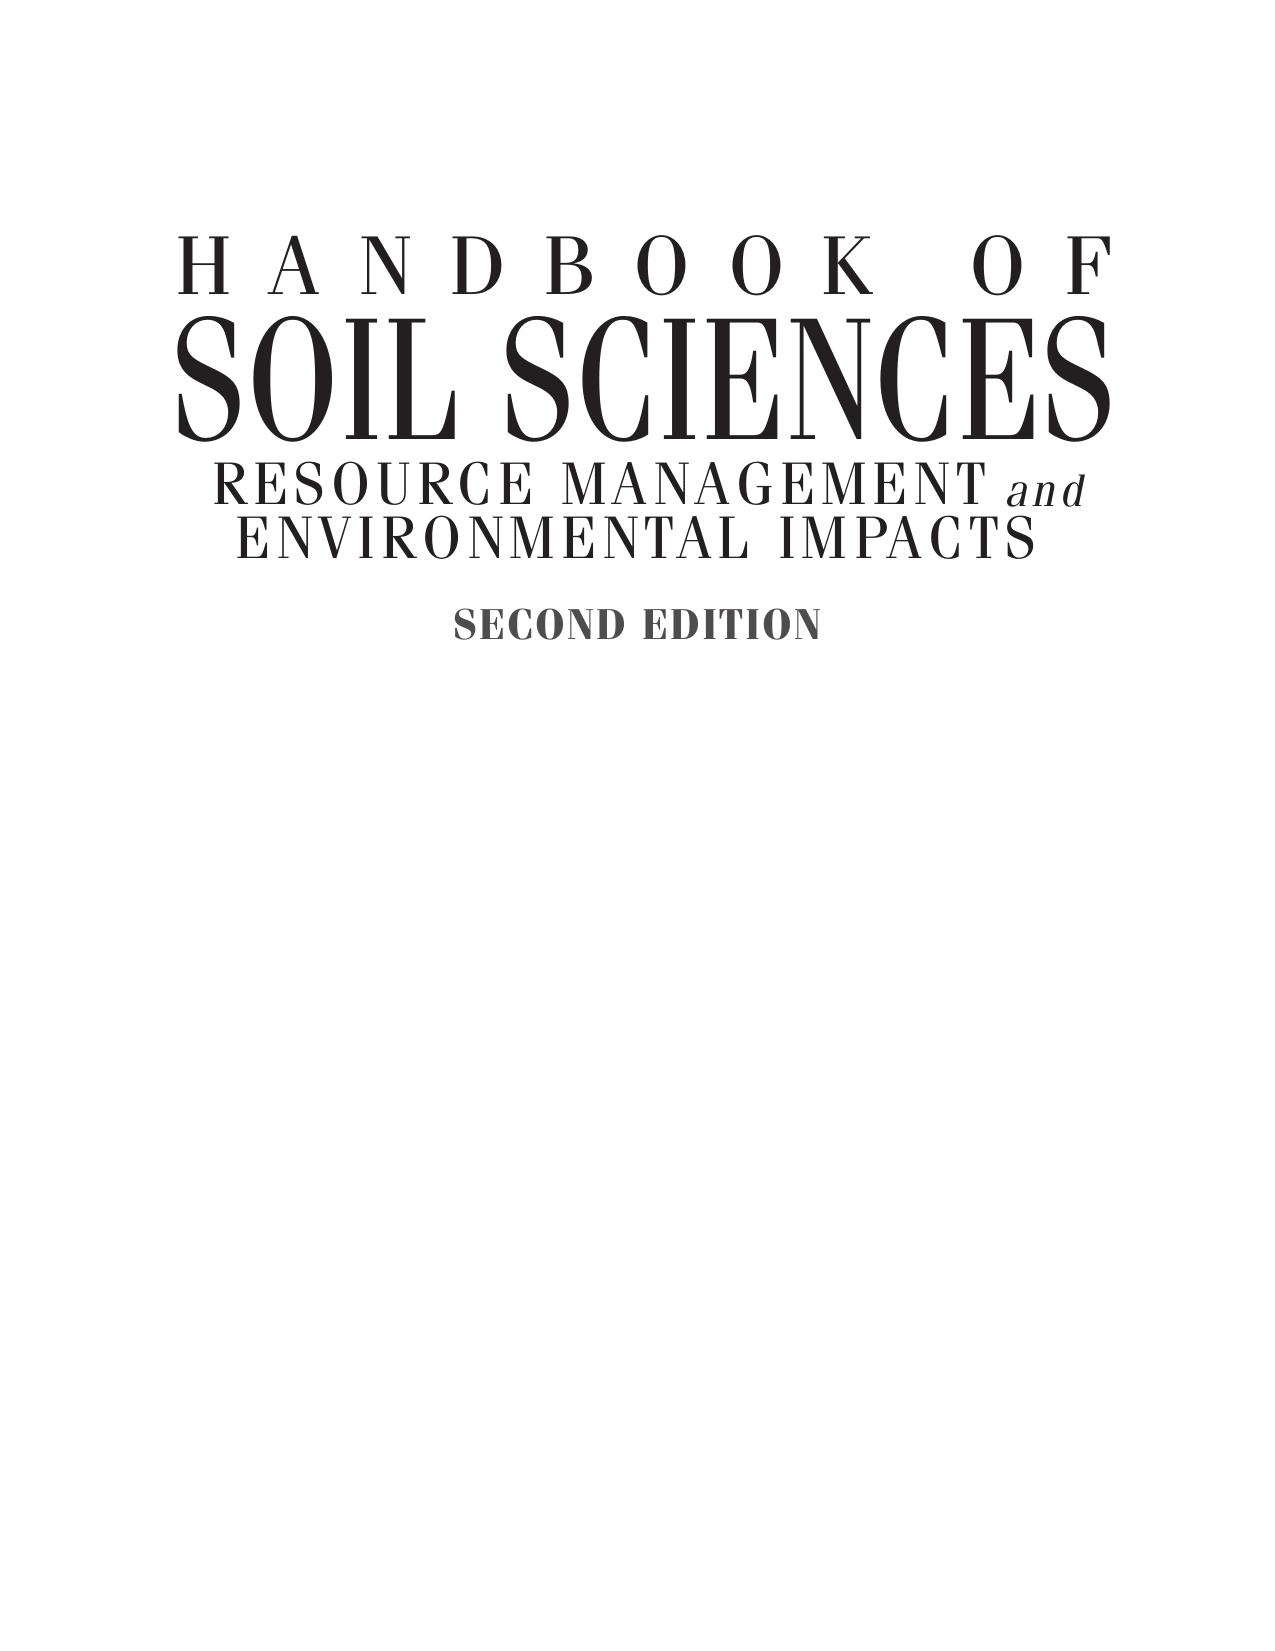 Handbook of soil sciences resource management and environmental impacts 2011